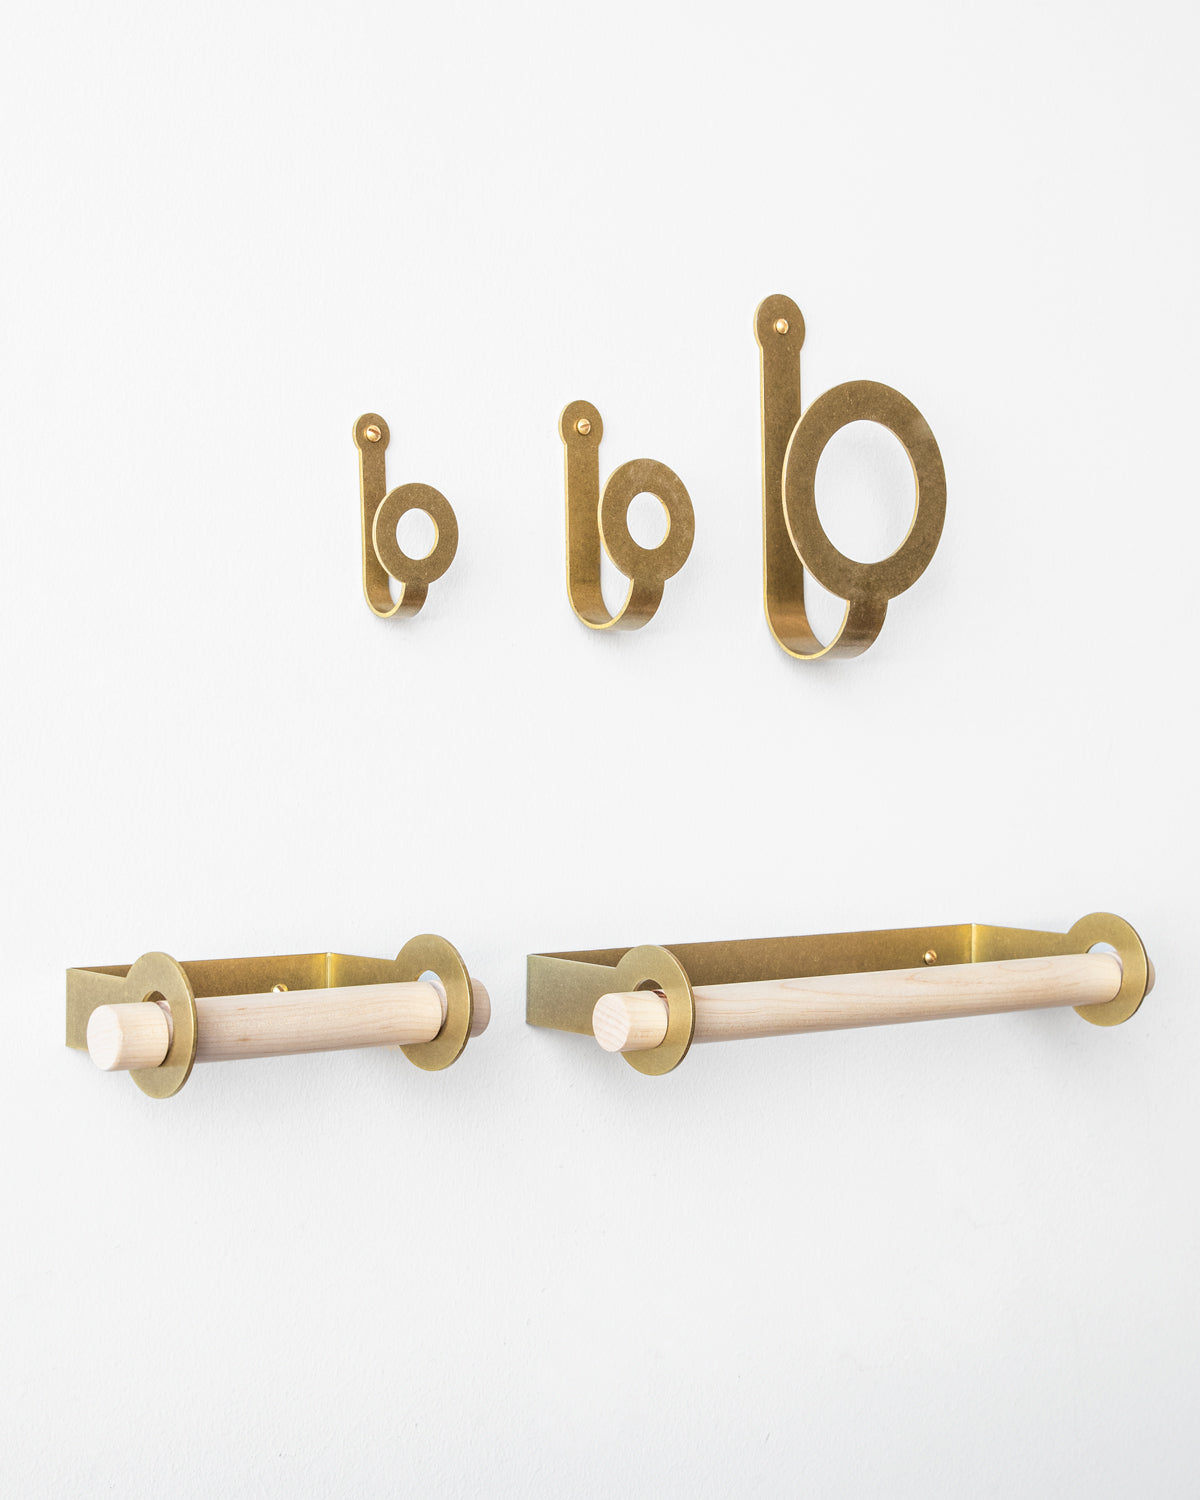 Three sizes of brass wall hooks above a brass toilet paper holder and brass paper towel holder, both empty.